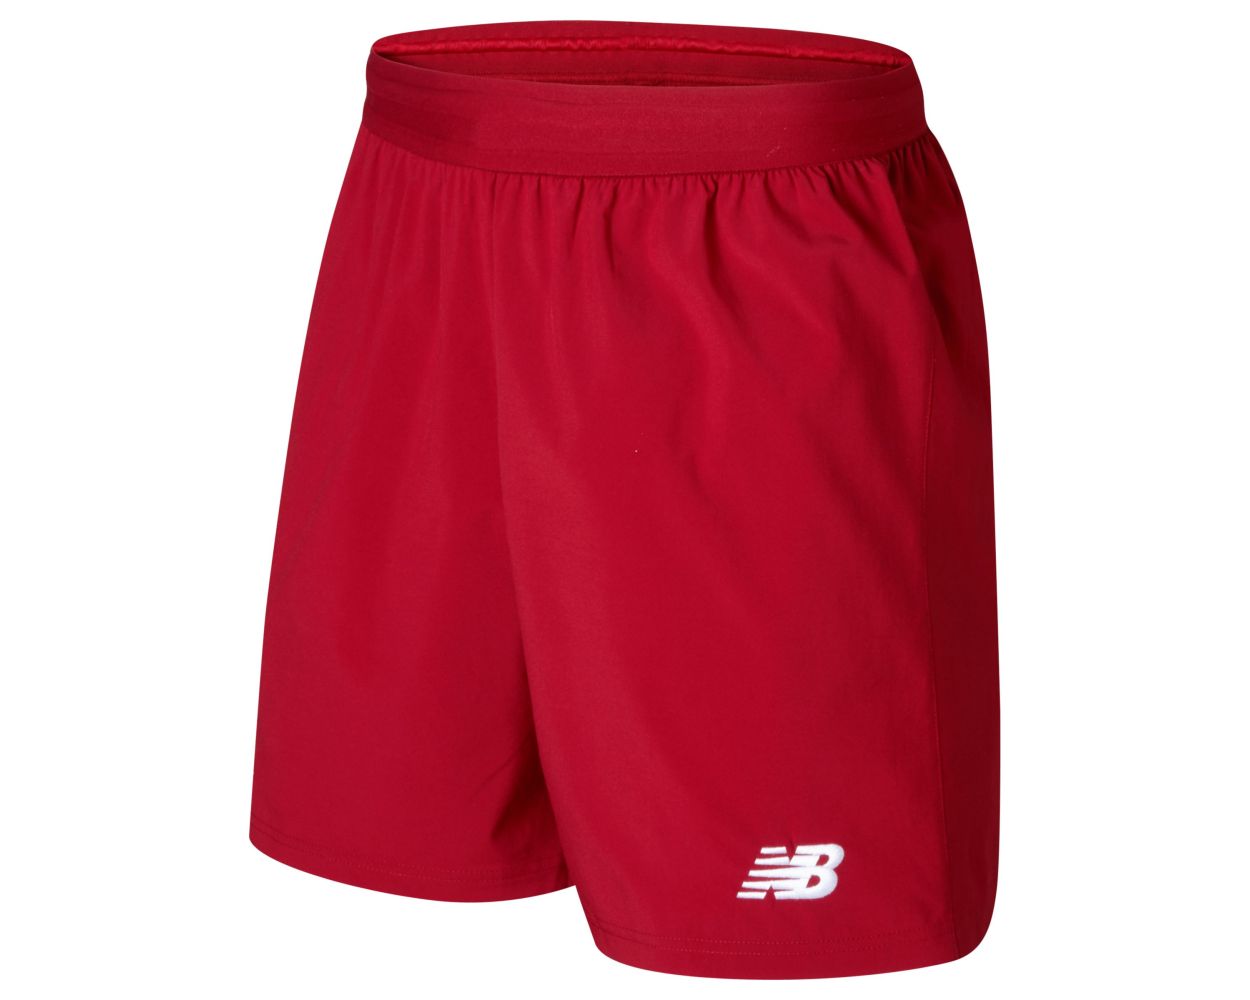 NB Liverpool Home Shorts 2017/18 - Red